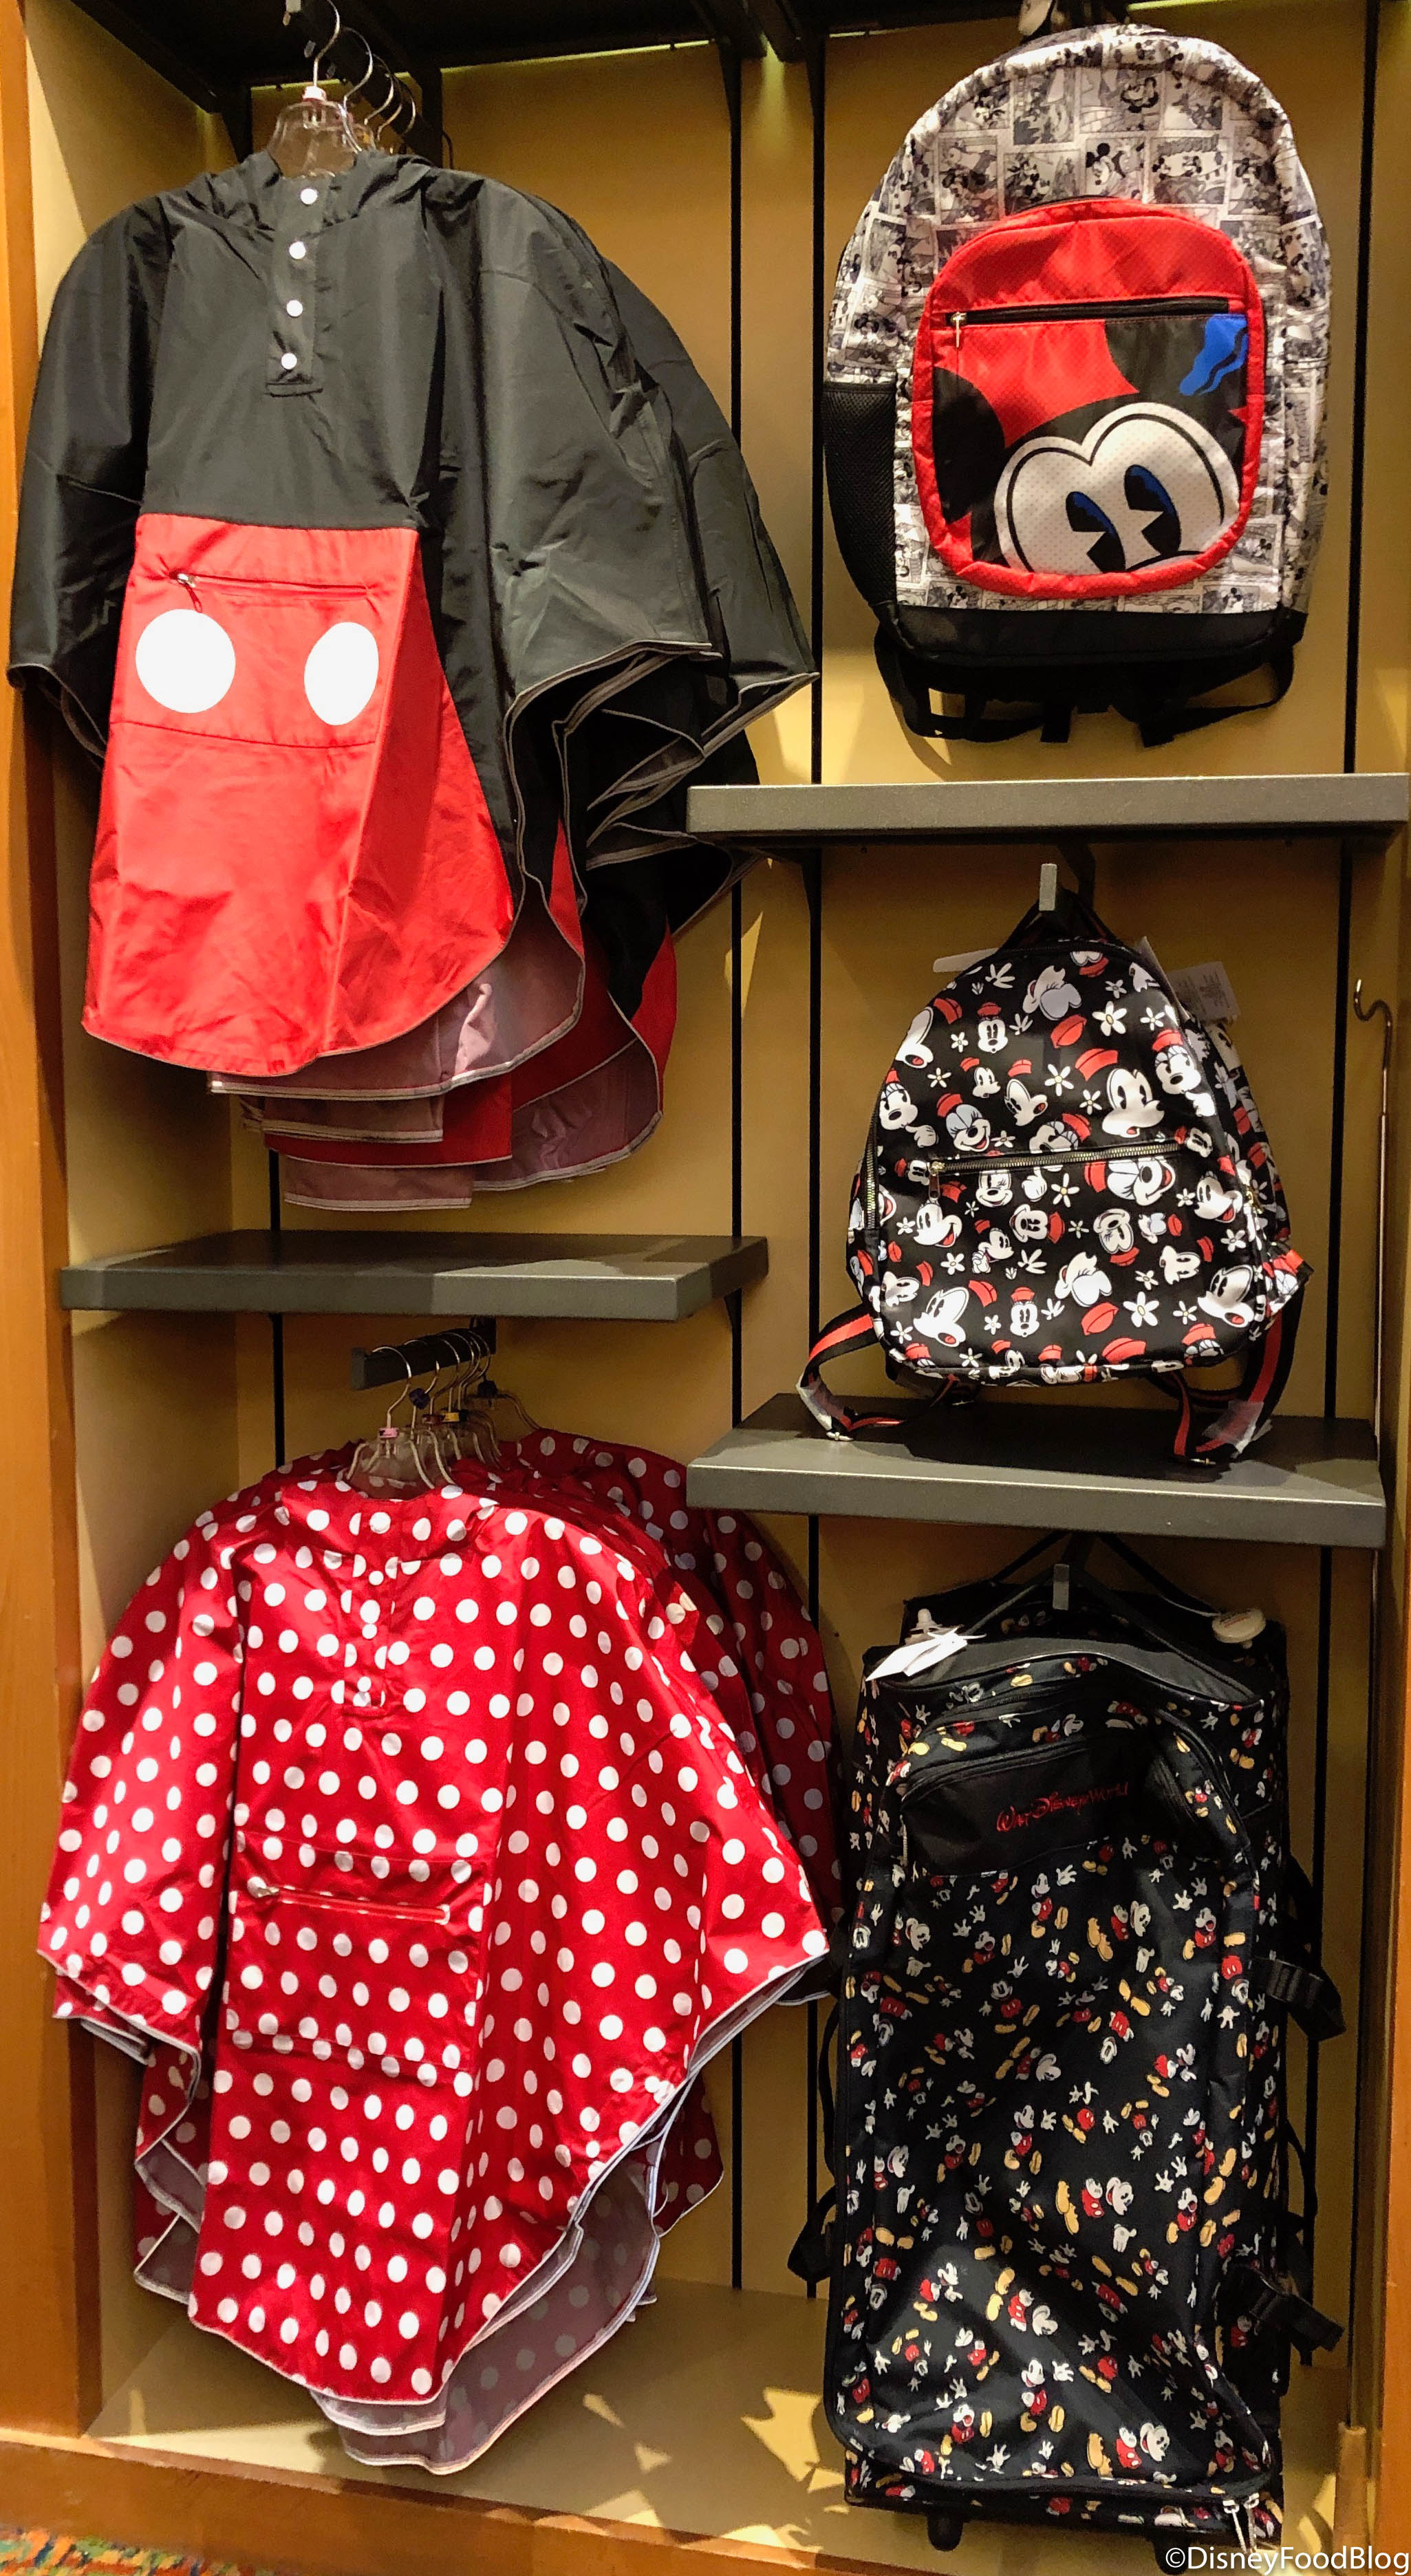 NEW! Disney Character and FOOD Inspired Rain Gear Spotted